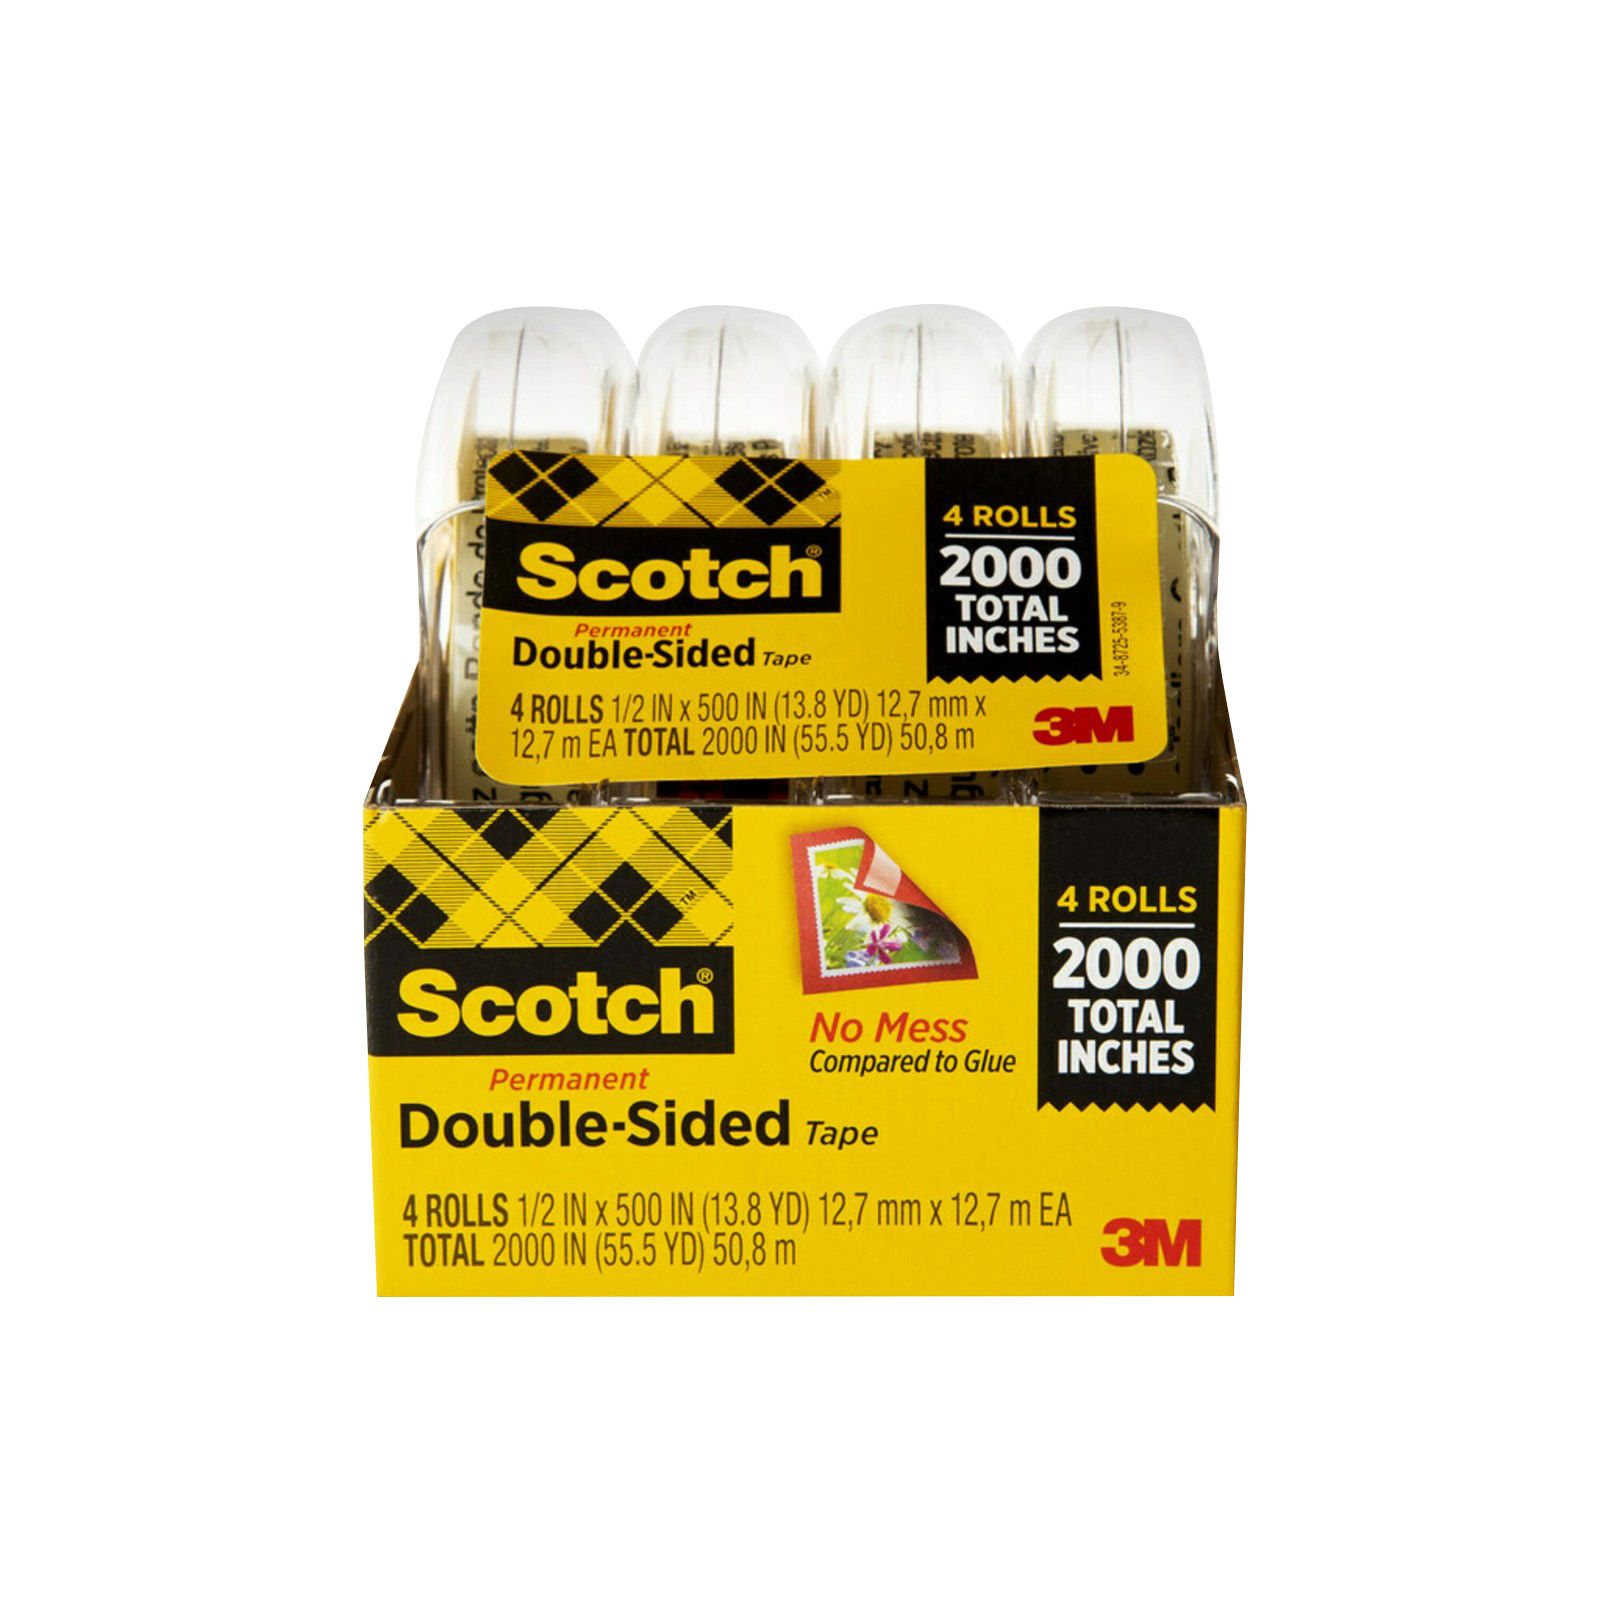 Scotch 665 Permanent Double Sided Tape, 1 x 1296, 3 Core